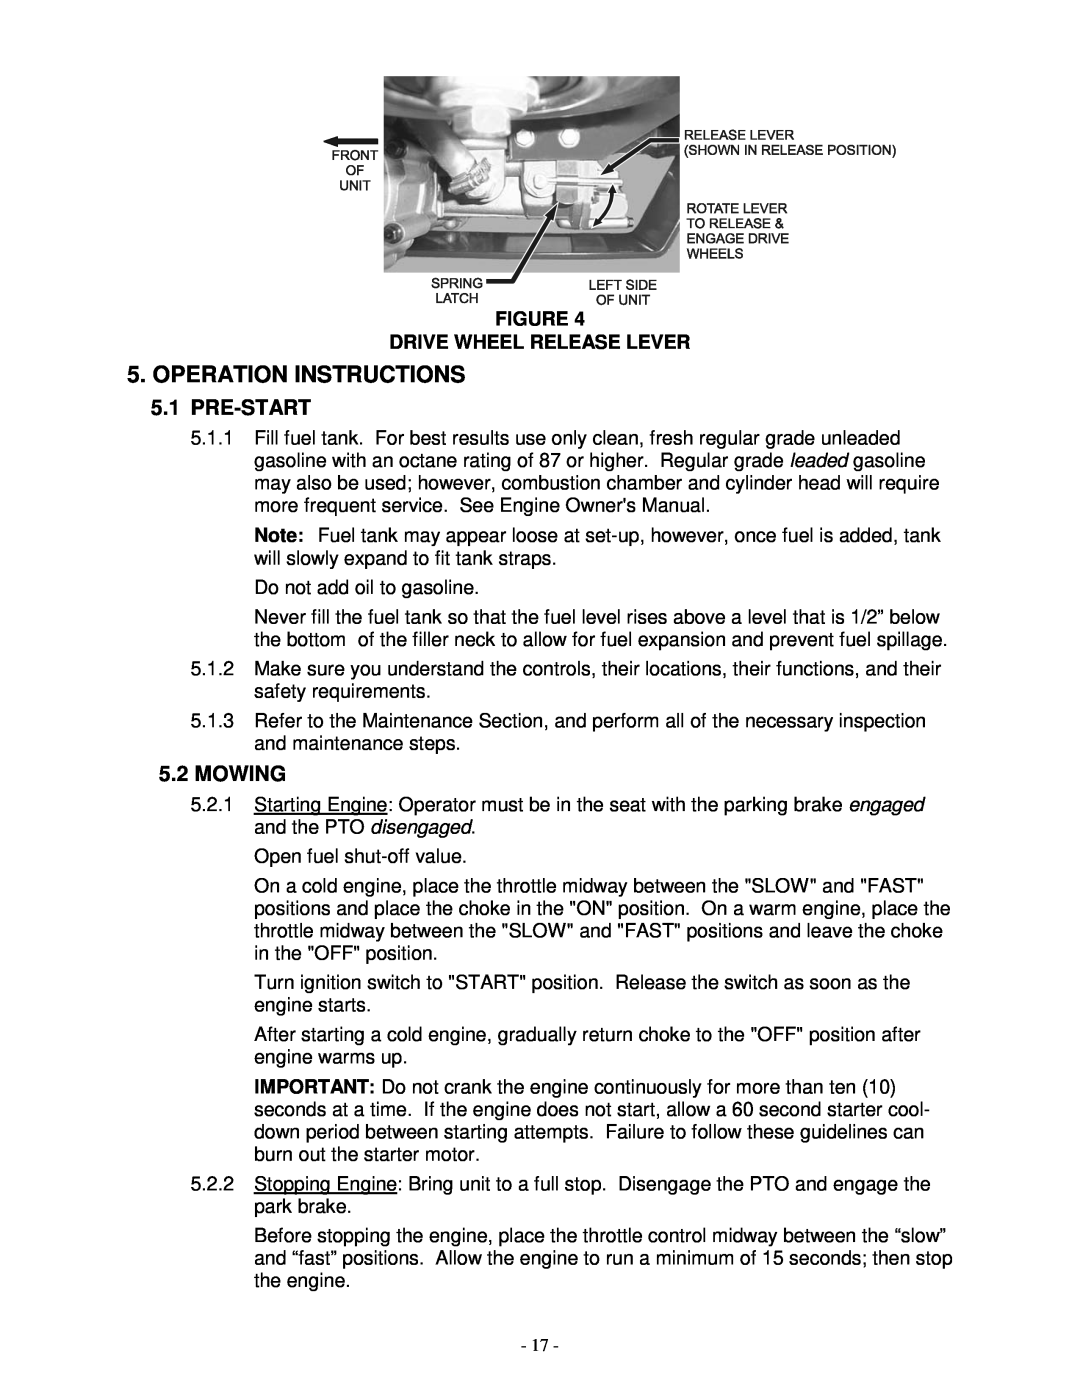 Exmark TR23KC manual Operation Instructions, 5.1PRE-START, 5.2MOWING, Figure Drive Wheel Release Lever 